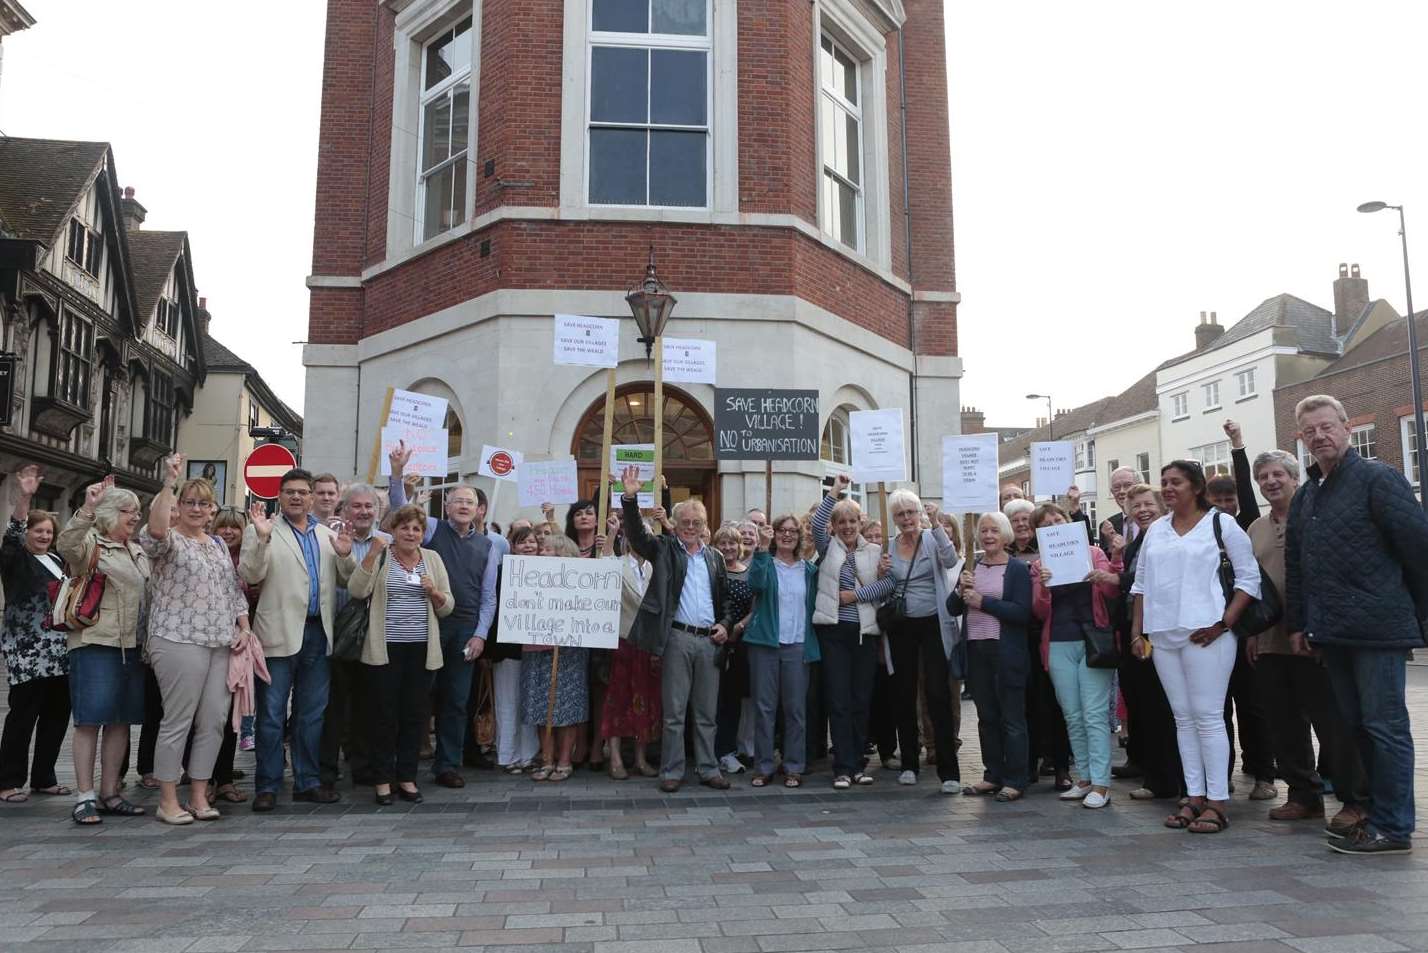 Demonstrators opposed to housing levels in Headcorn and in Lenham protested outside Maidstone Town Hall